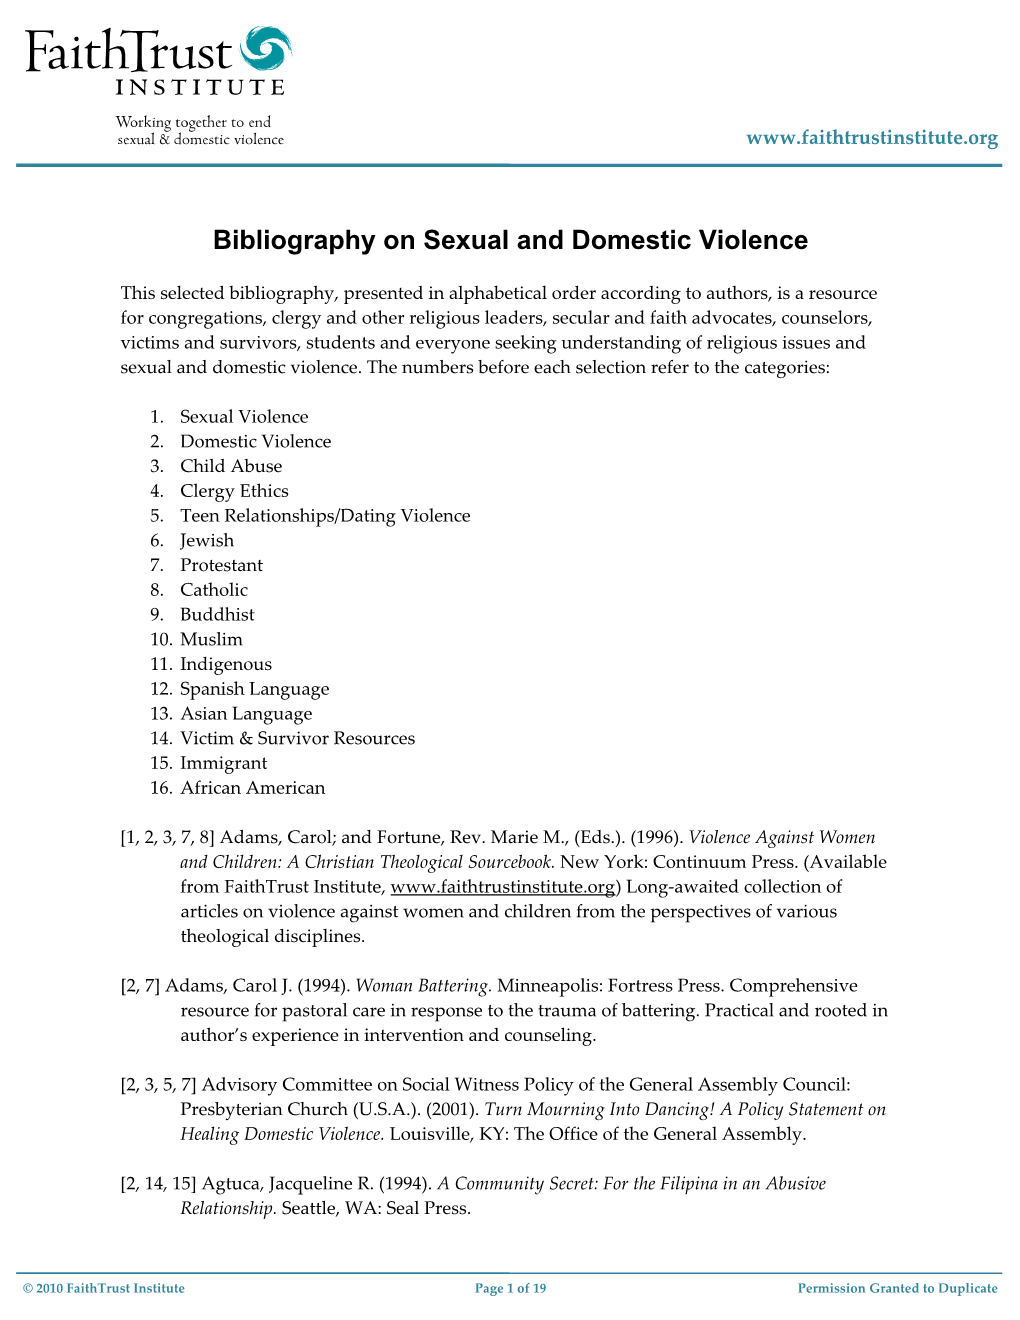 Bibliography on Sexual and Domestic Violence